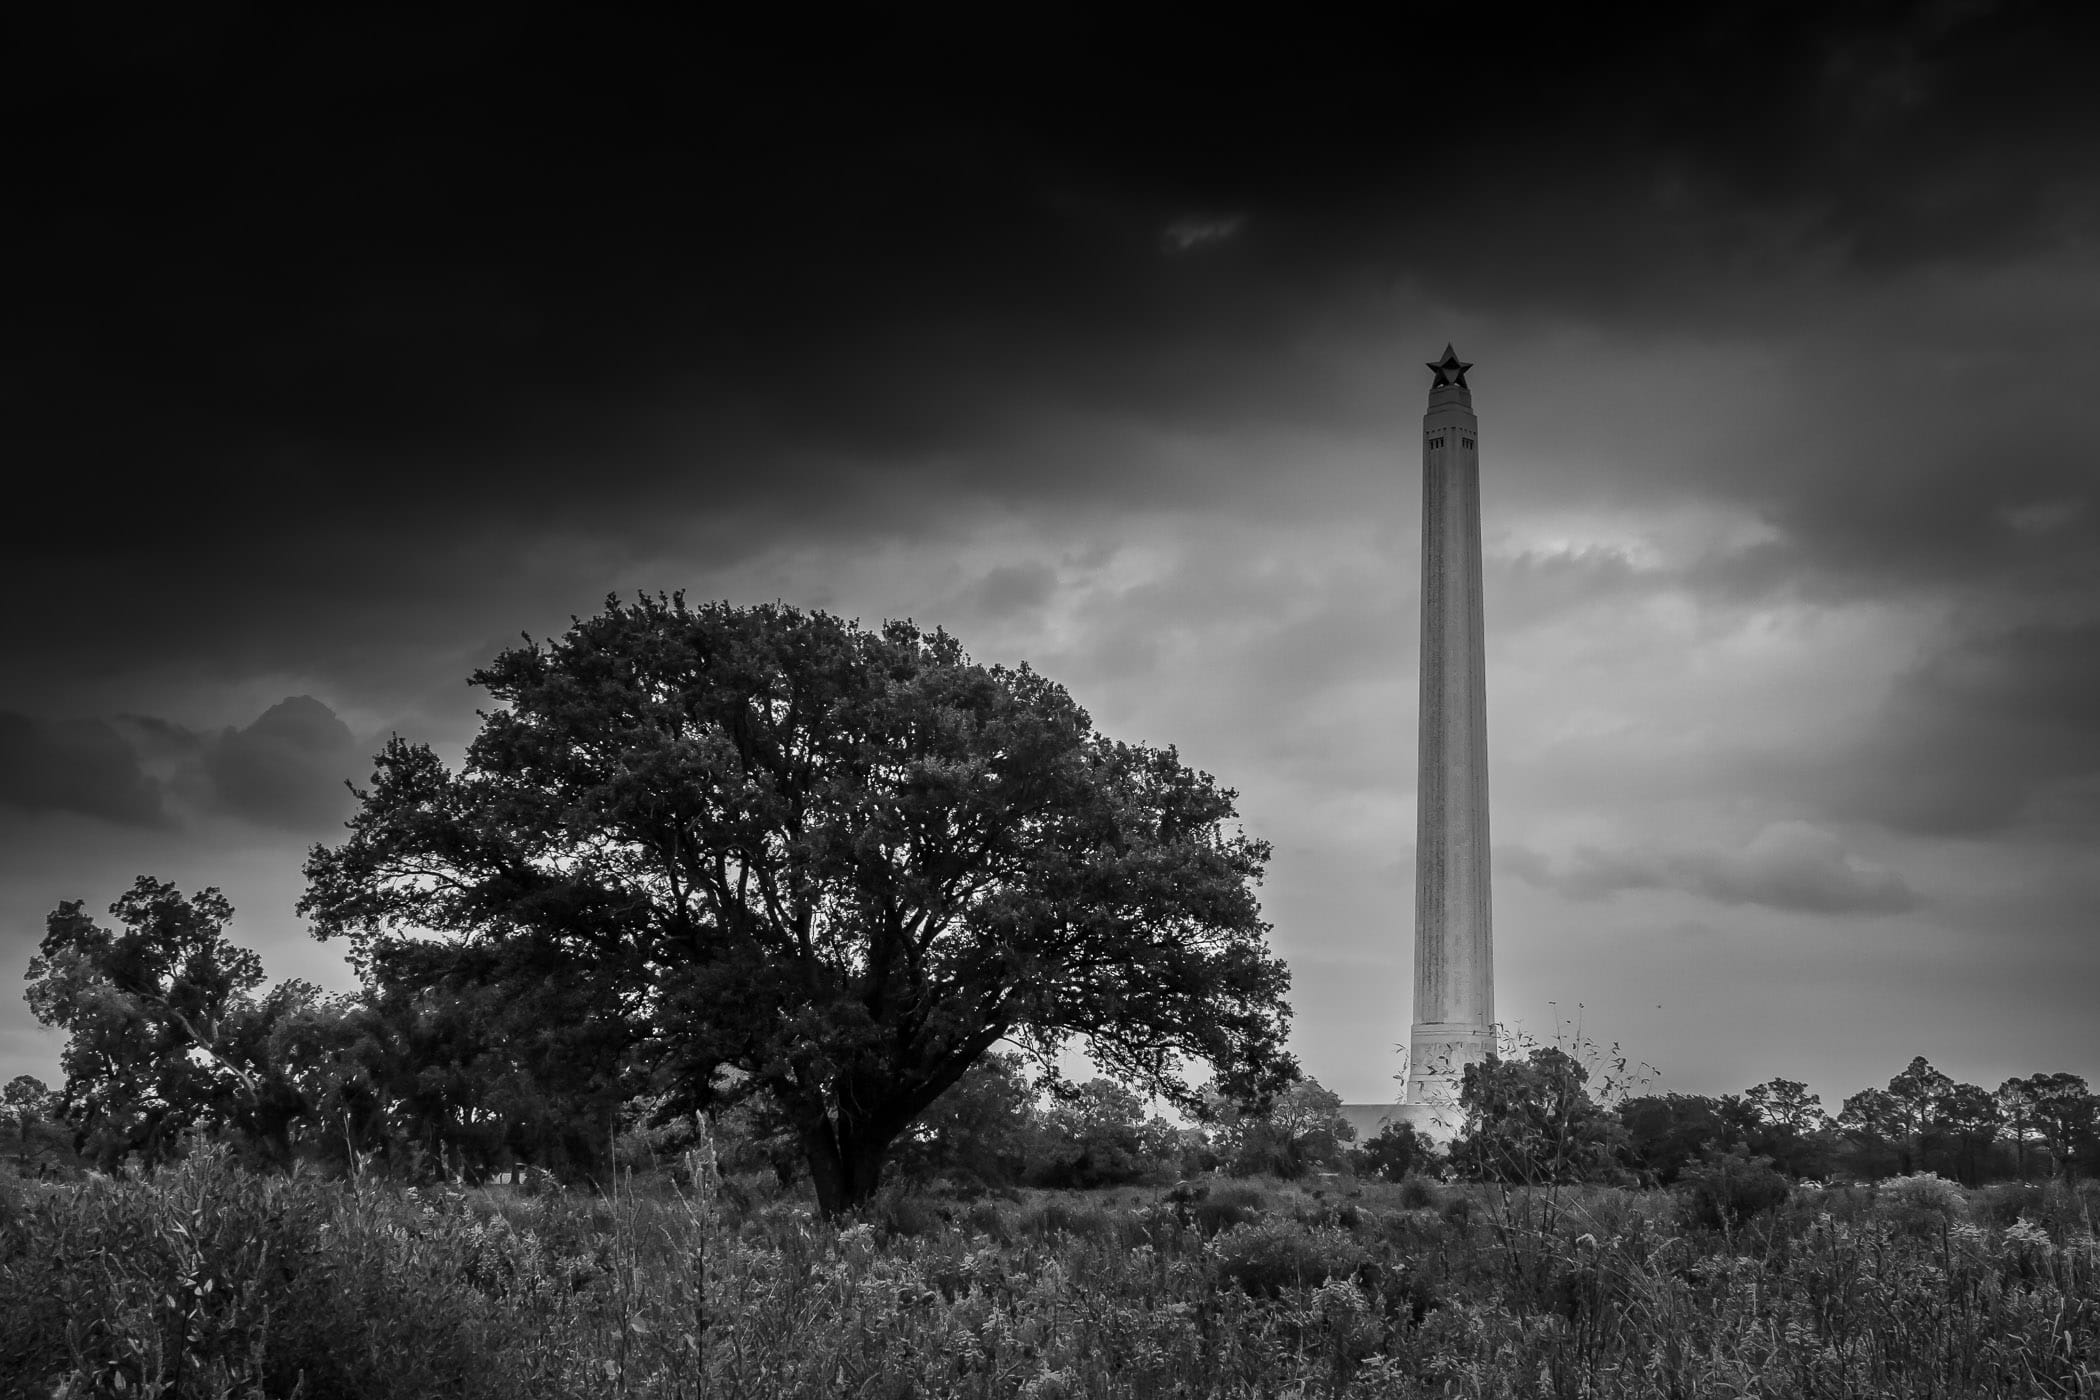 Texas' San Jacinto Monument—a 567-foot-tall granite column that commemorates the Battle of San Jacinto during the Texas Revolution—rises above the surrounding fields along the Houston Ship Channel.